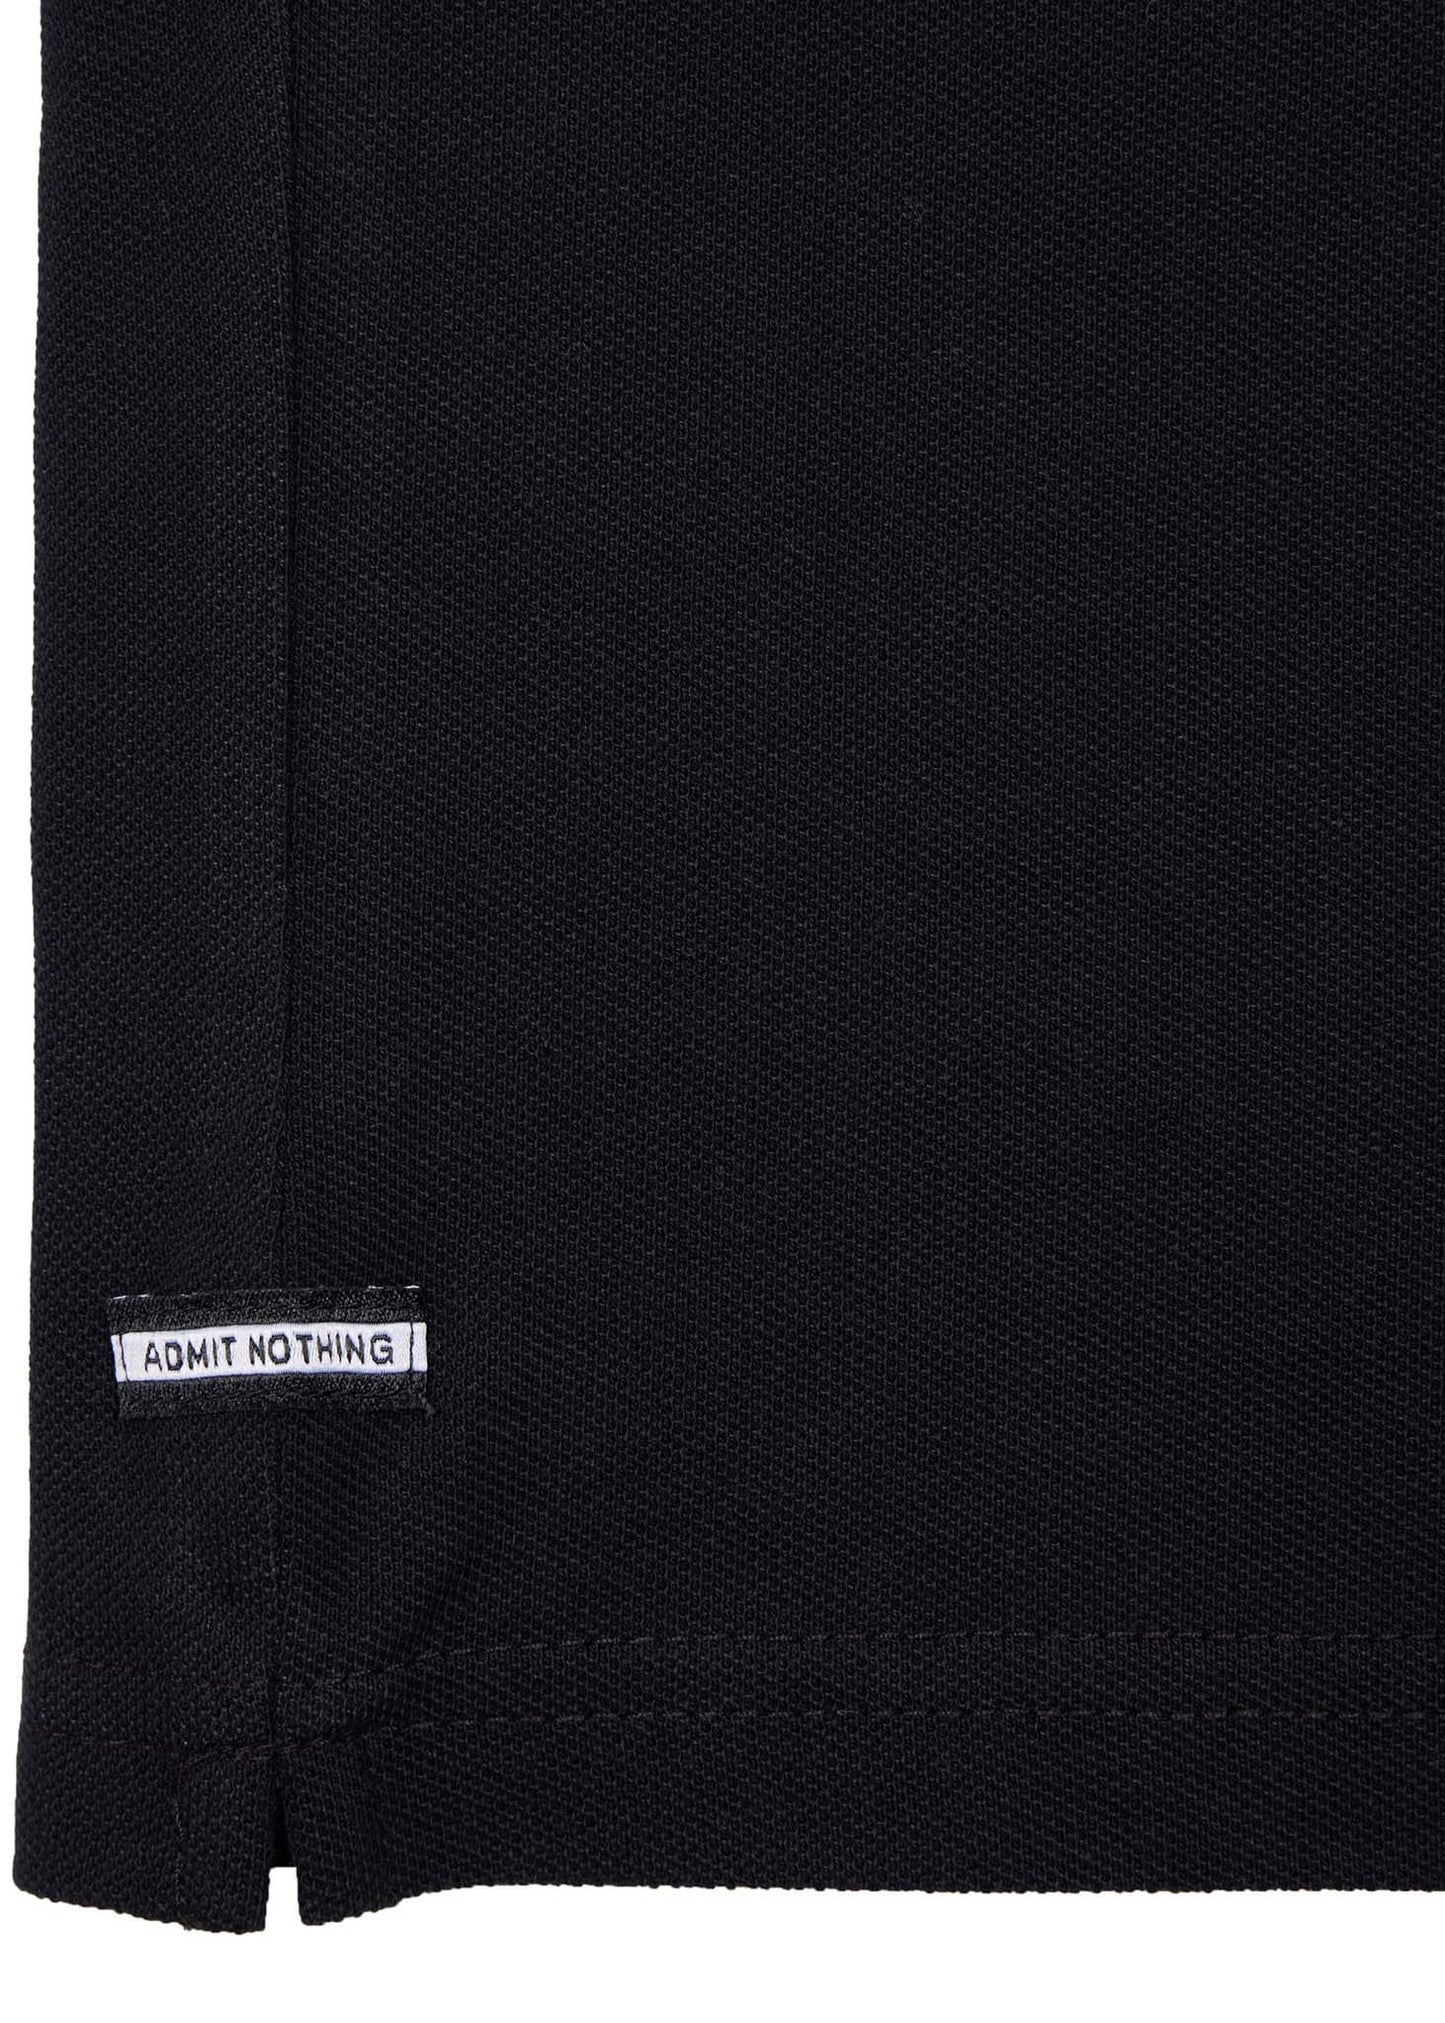 Weekend Offender polo black